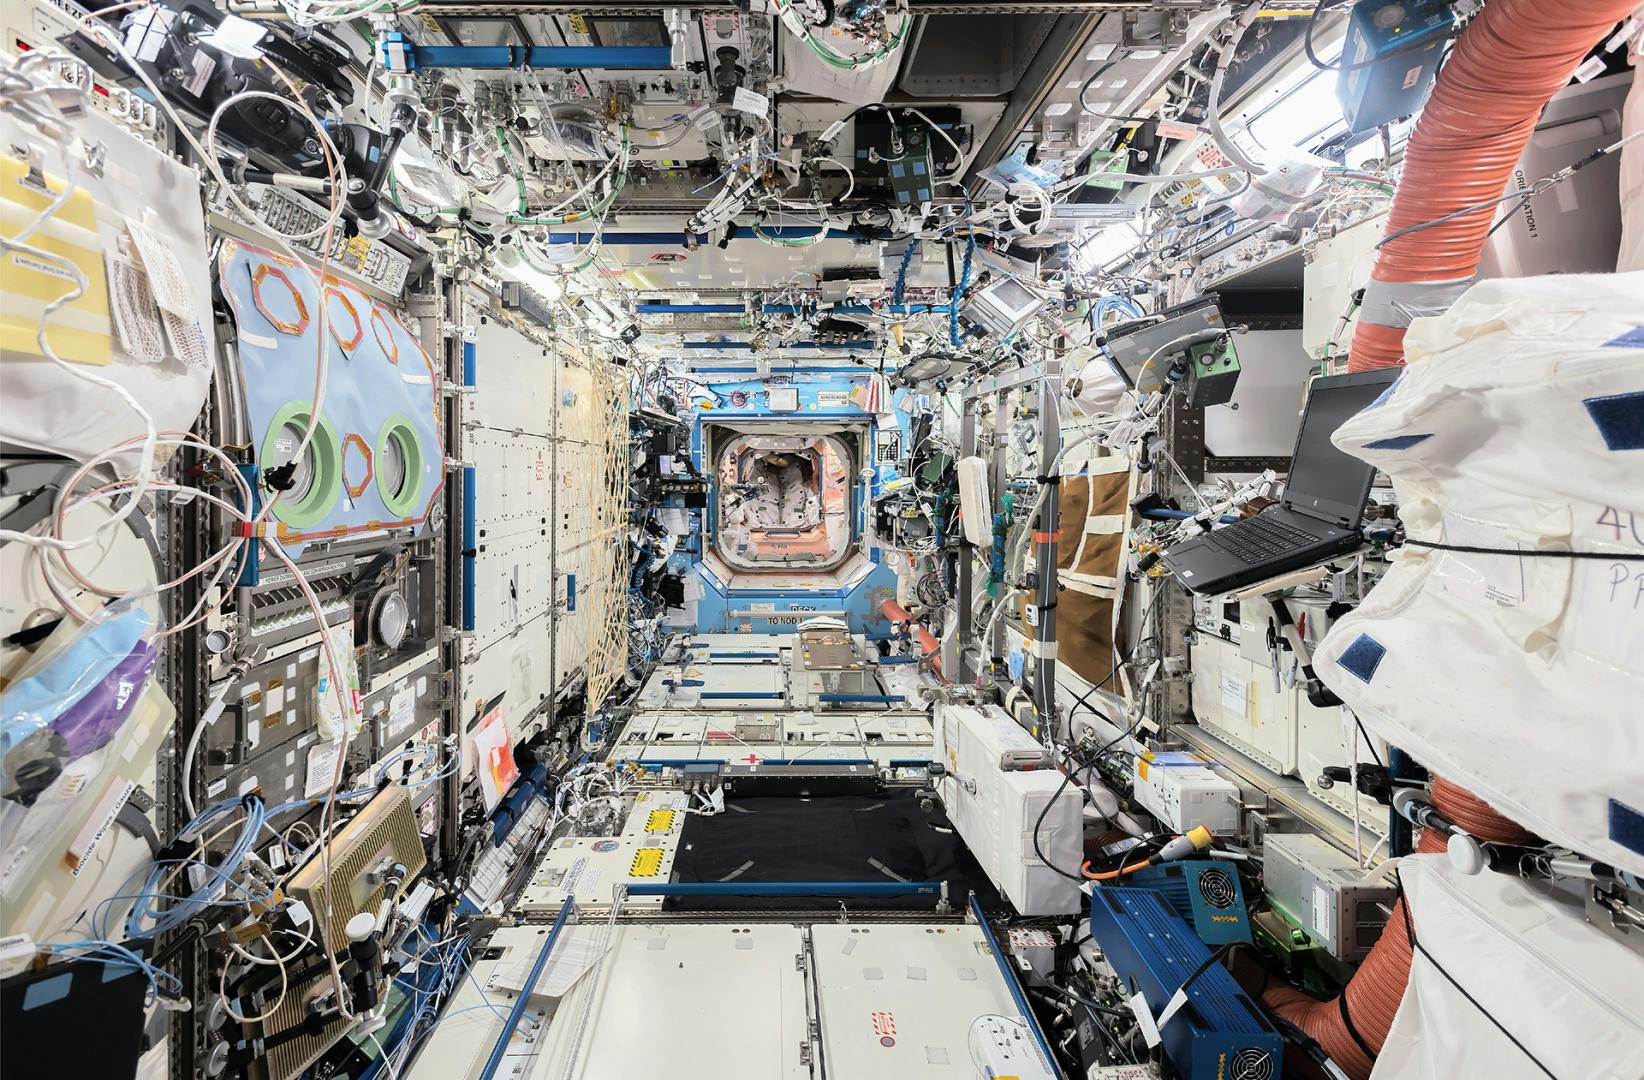 International Space Station book